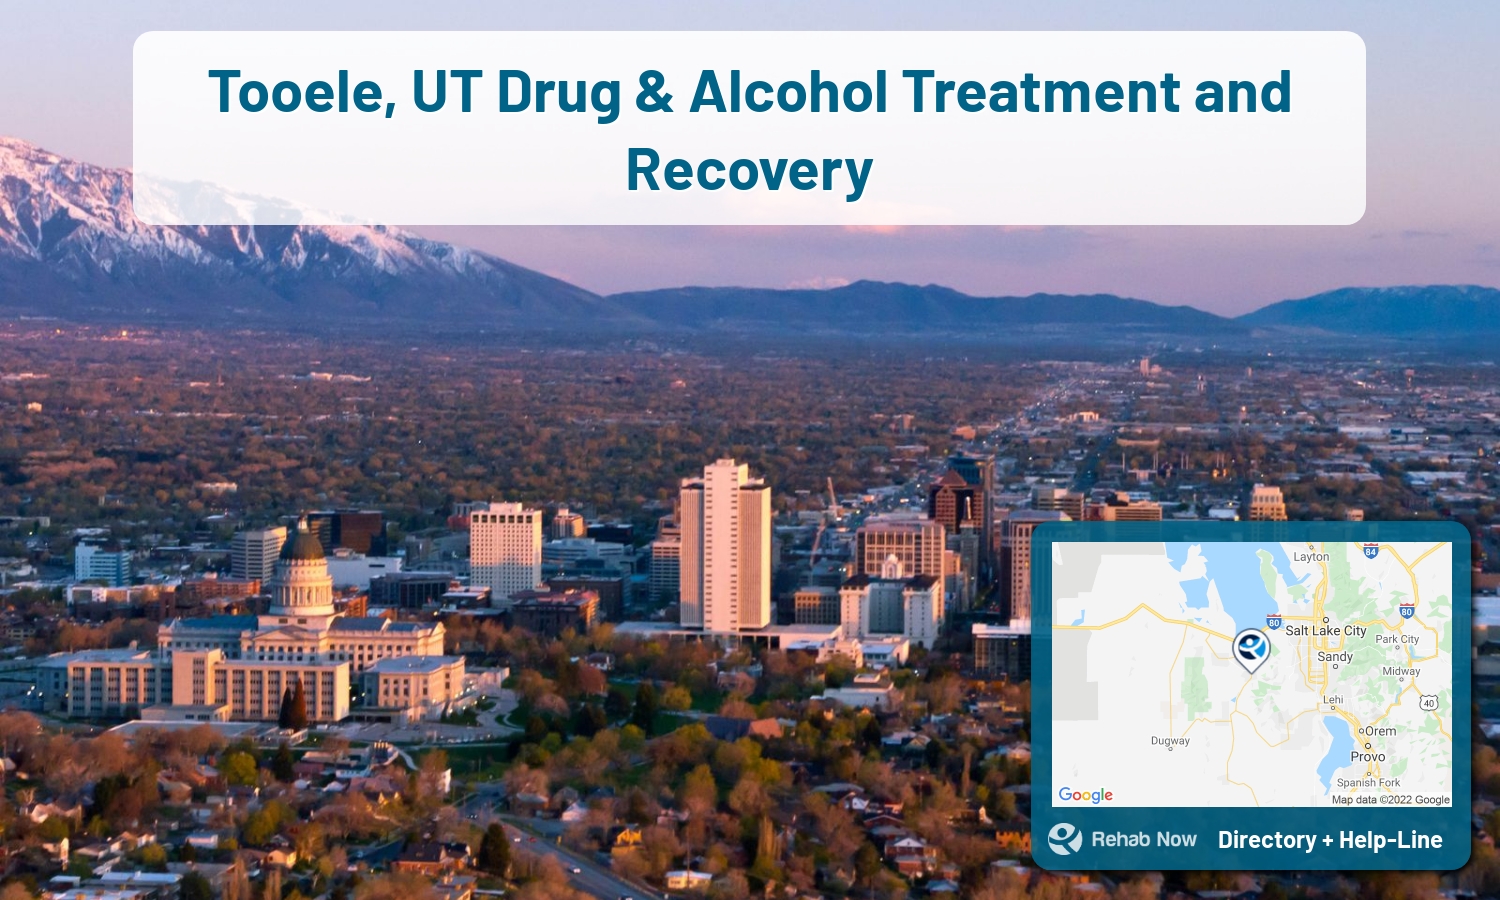 View options, availability, treatment methods, and more, for drug rehab and alcohol treatment in Tooele, Utah